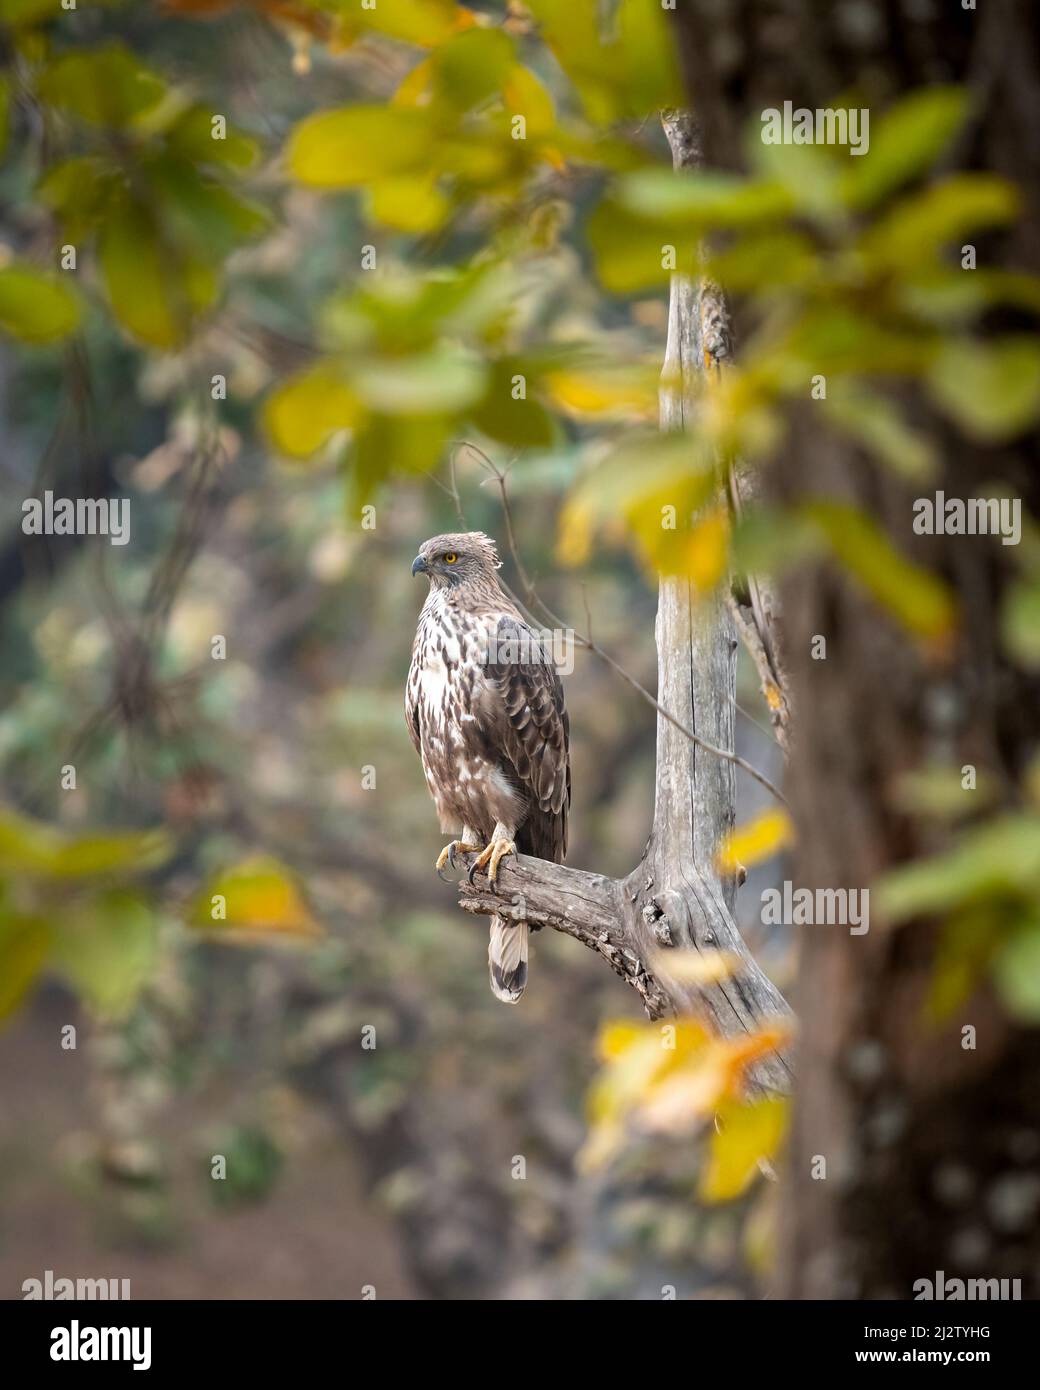 changeable or crested hawk eagle portrait with eye contact perched on tree in natural wood and leaves frame at bandhavgarh national park forest india Stock Photo